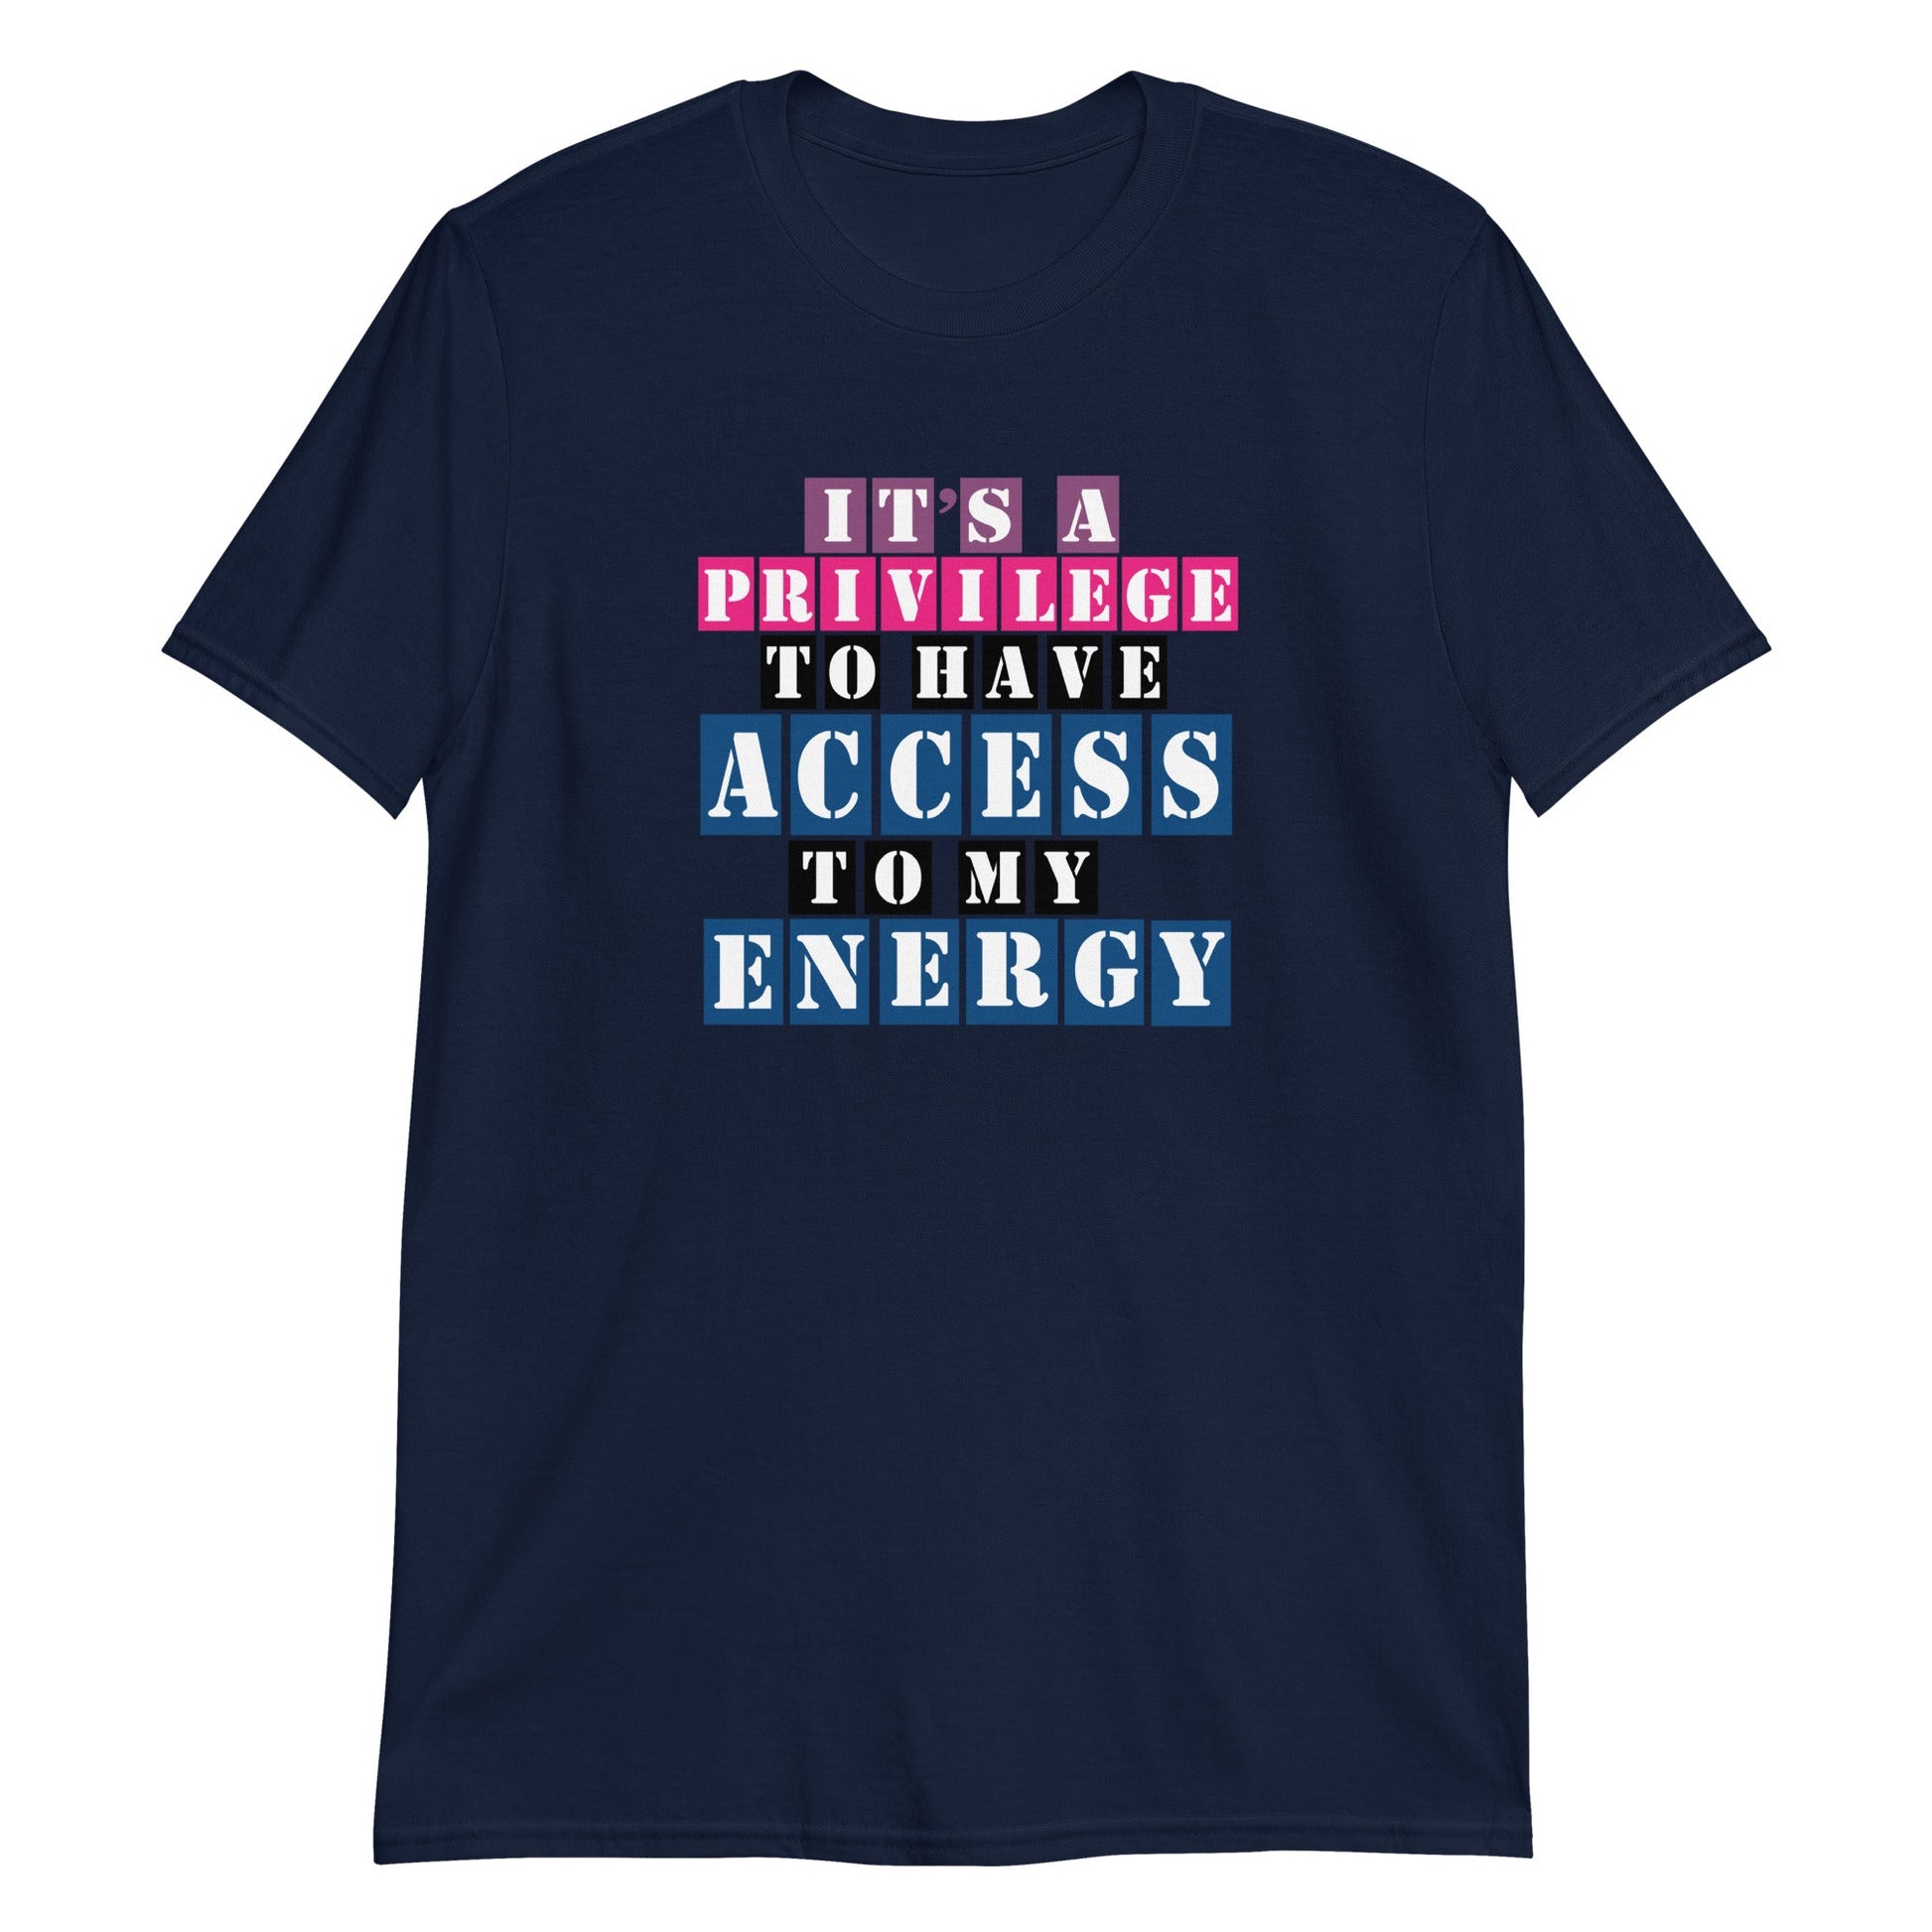 It's A Privilege to Have Access to My Energy Short-Sleeve Unisex T-Shirt (For a Slim Fit Order A Size Down) - Catch This Tea Shirts